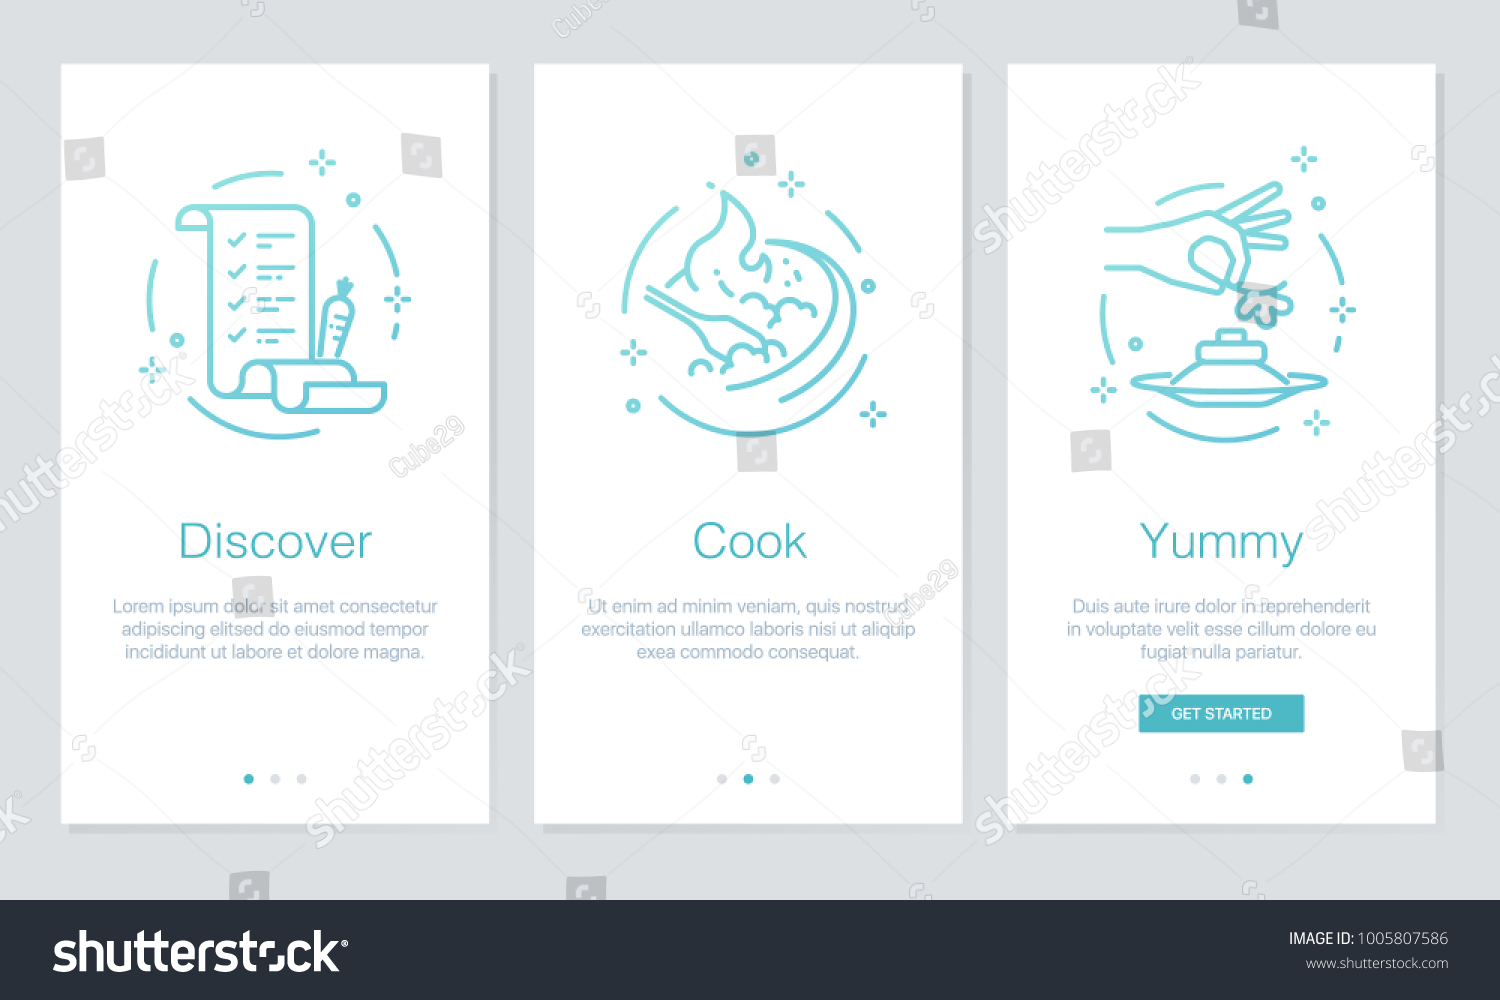 Food and Recipes concept onboarding app screens. Modern and simplified vector illustration walkthrough screens template for mobile apps. #1005807586